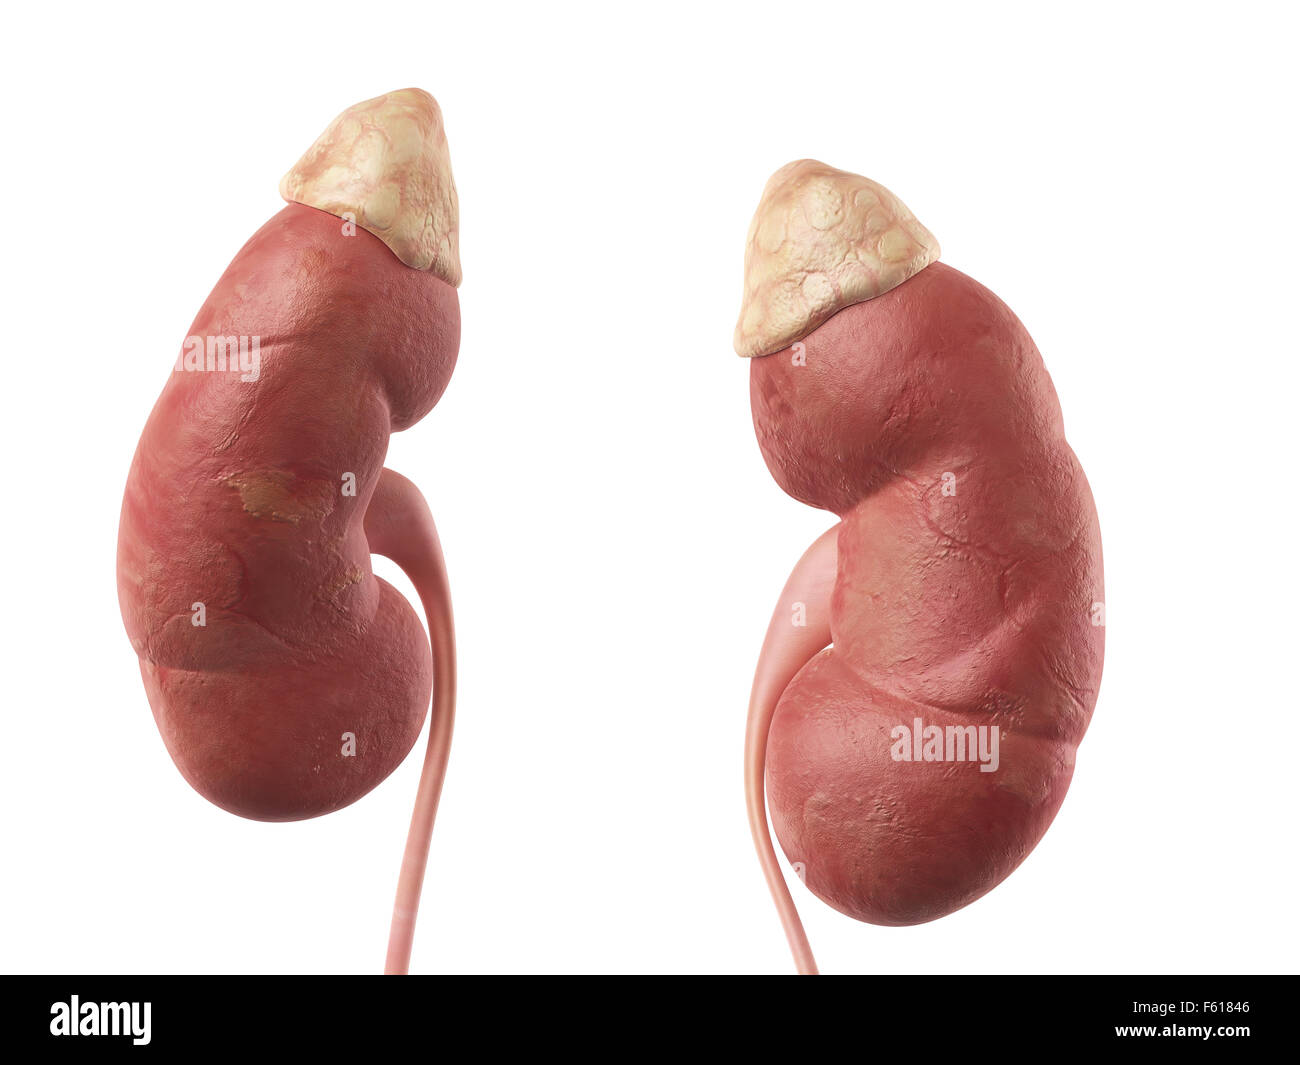 medically accurate illustration of the kidney Stock Photo